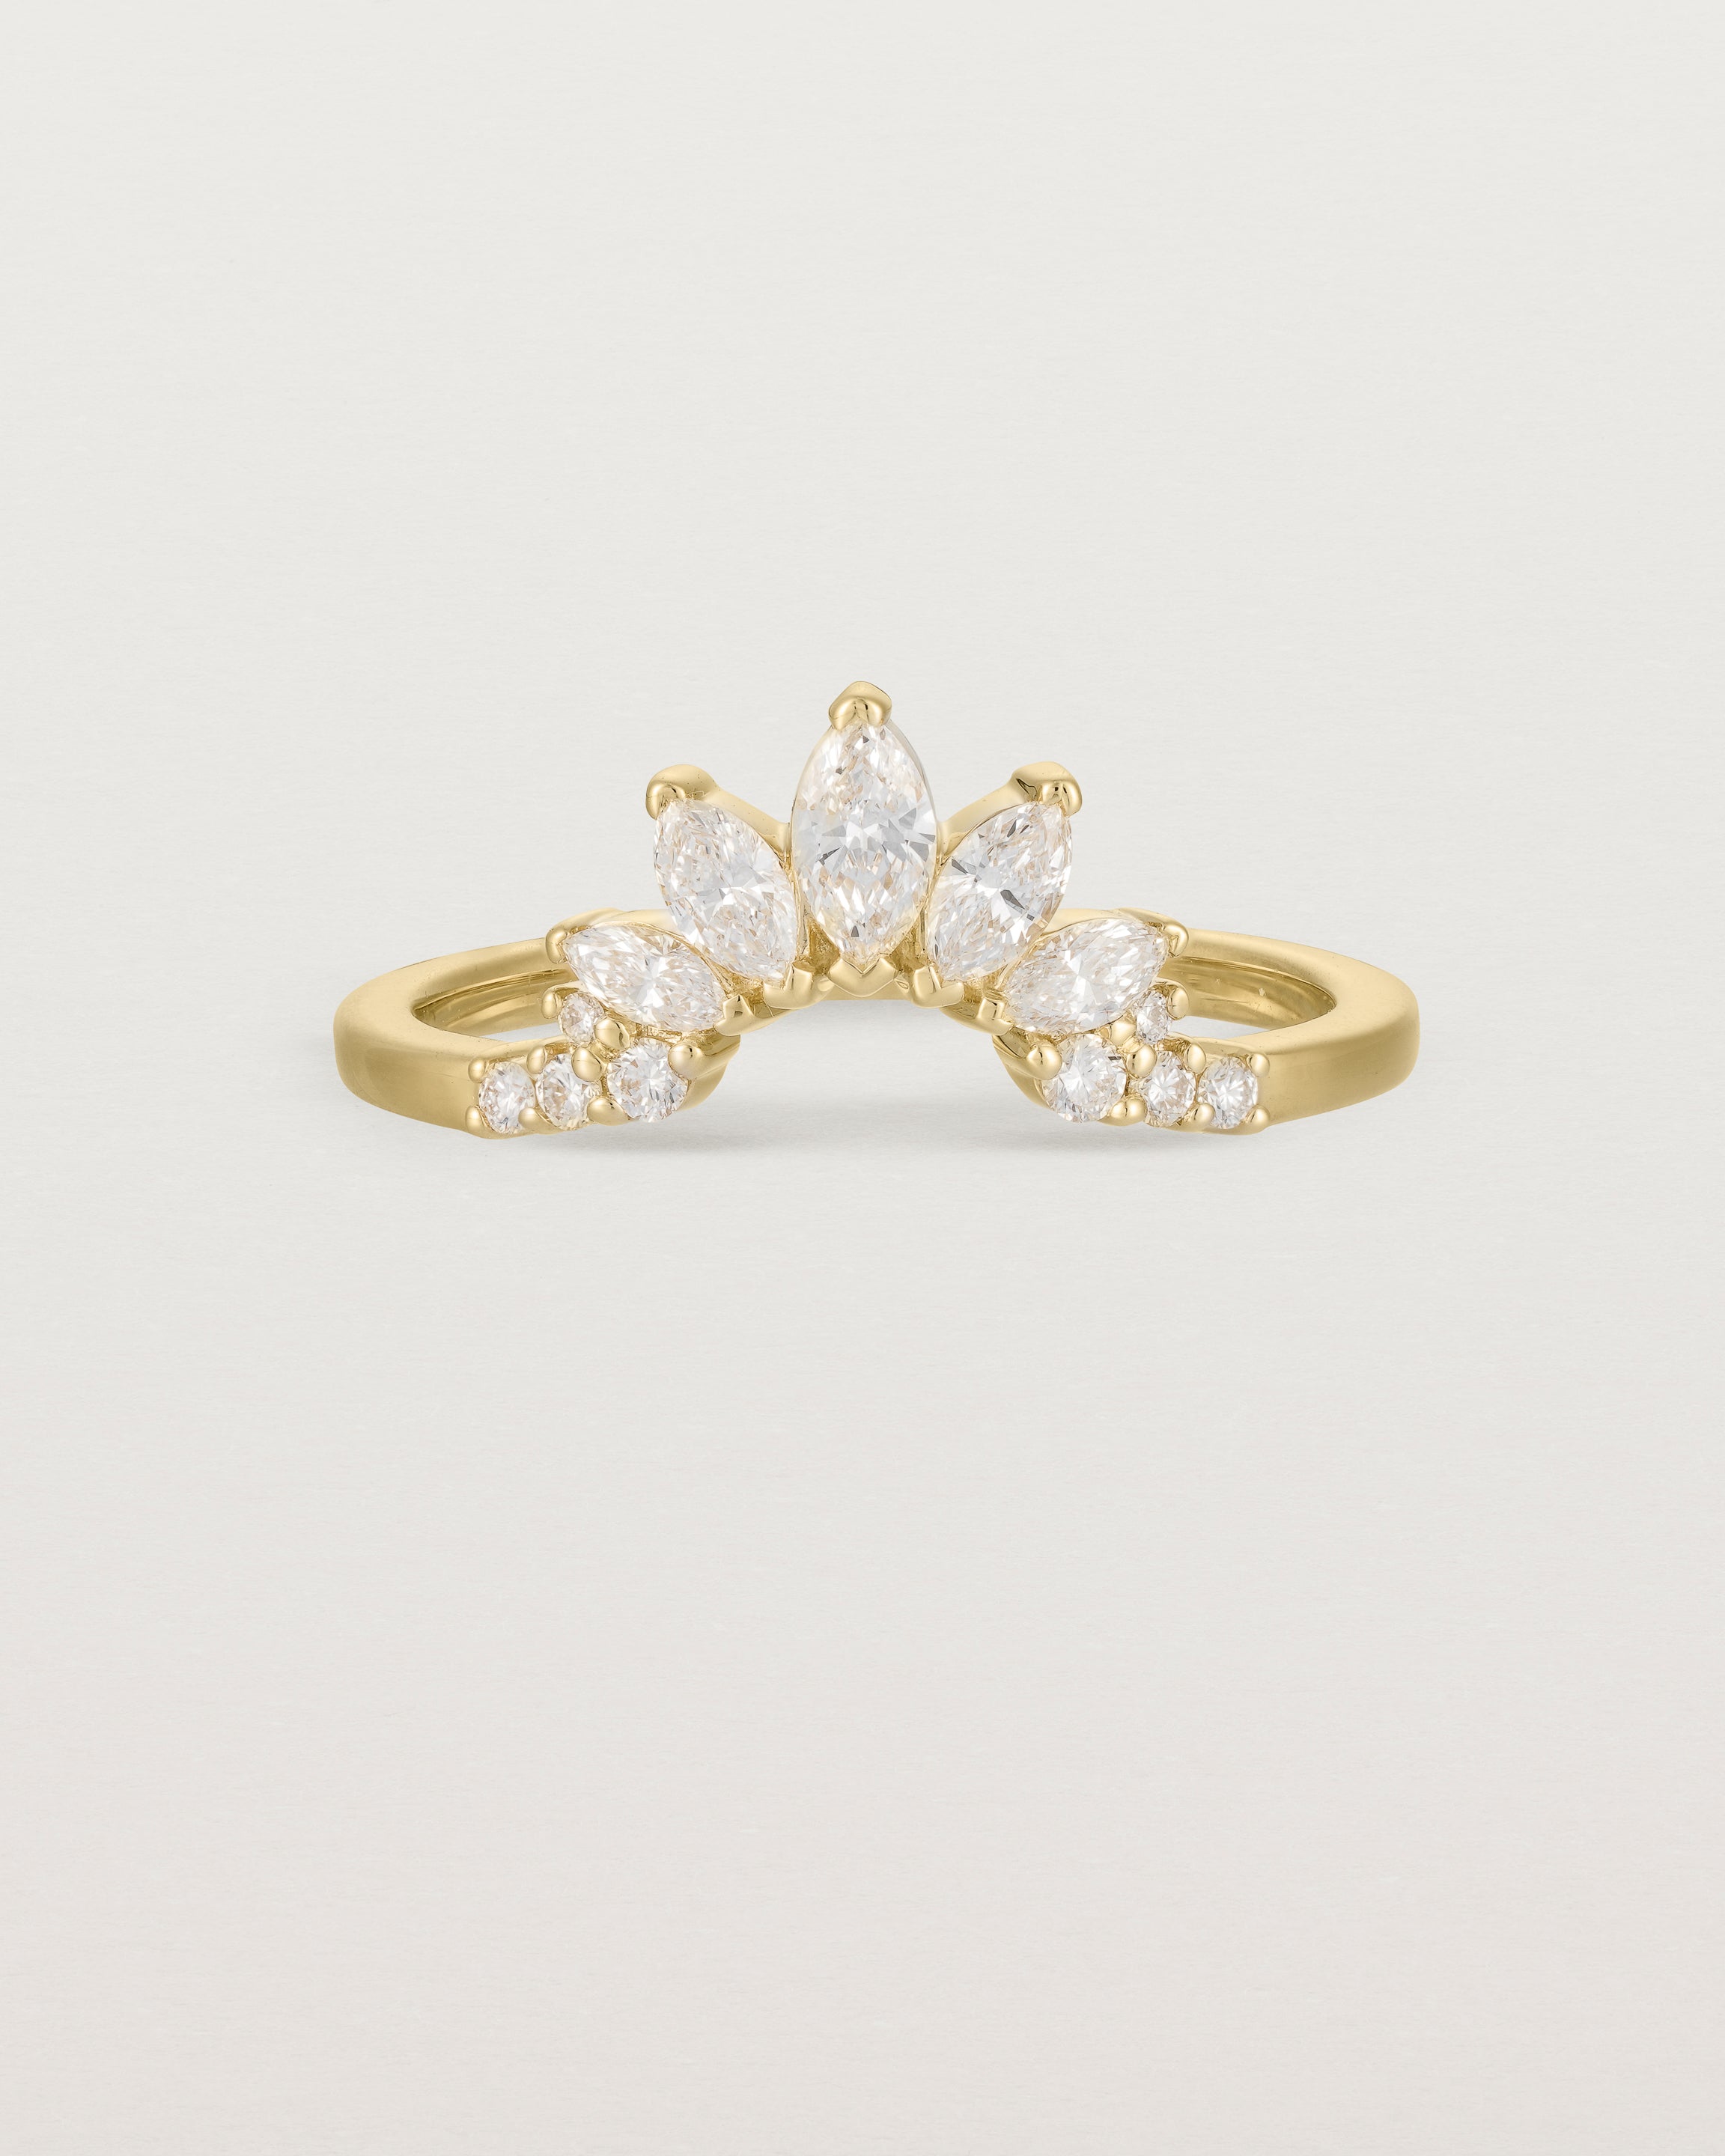 Size three of a sun-bream inspired white diamond crown ring, crafted in yellow gold